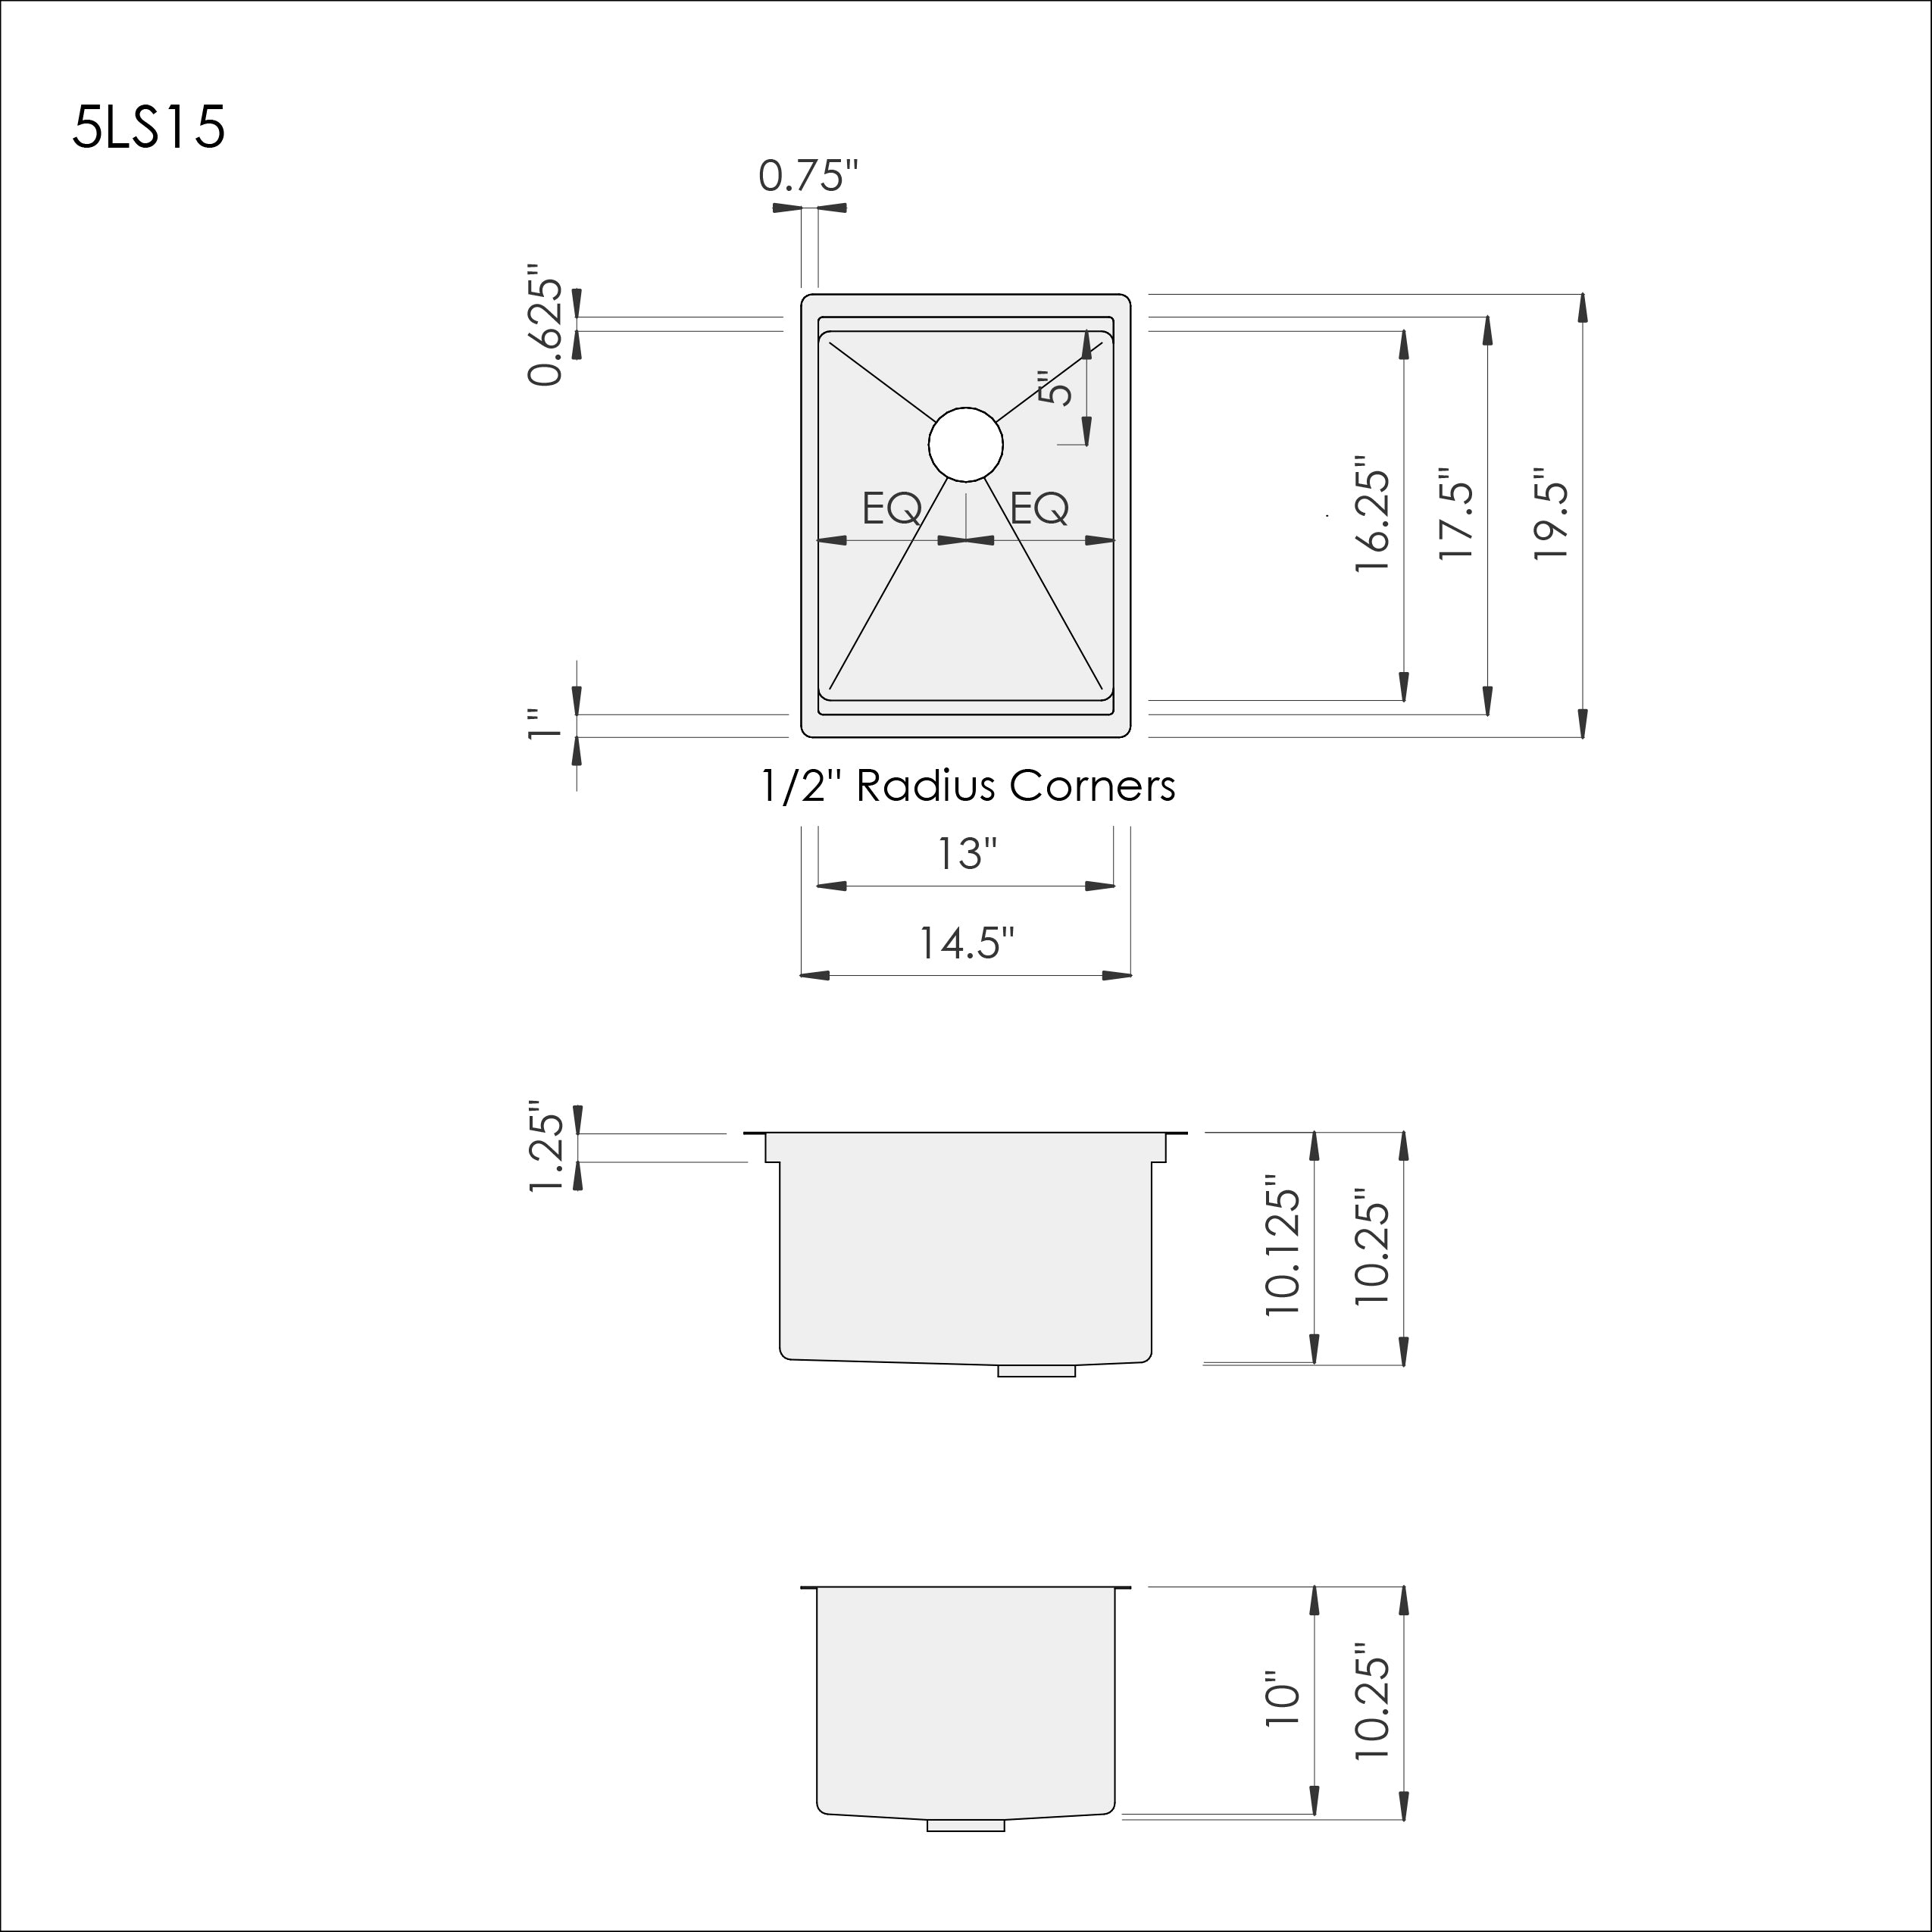 Dimensions of Create Good Sinks 15 inch stainless steel undermount workstation sink. The perfect size for a bar or prep area. Seamess Drain design